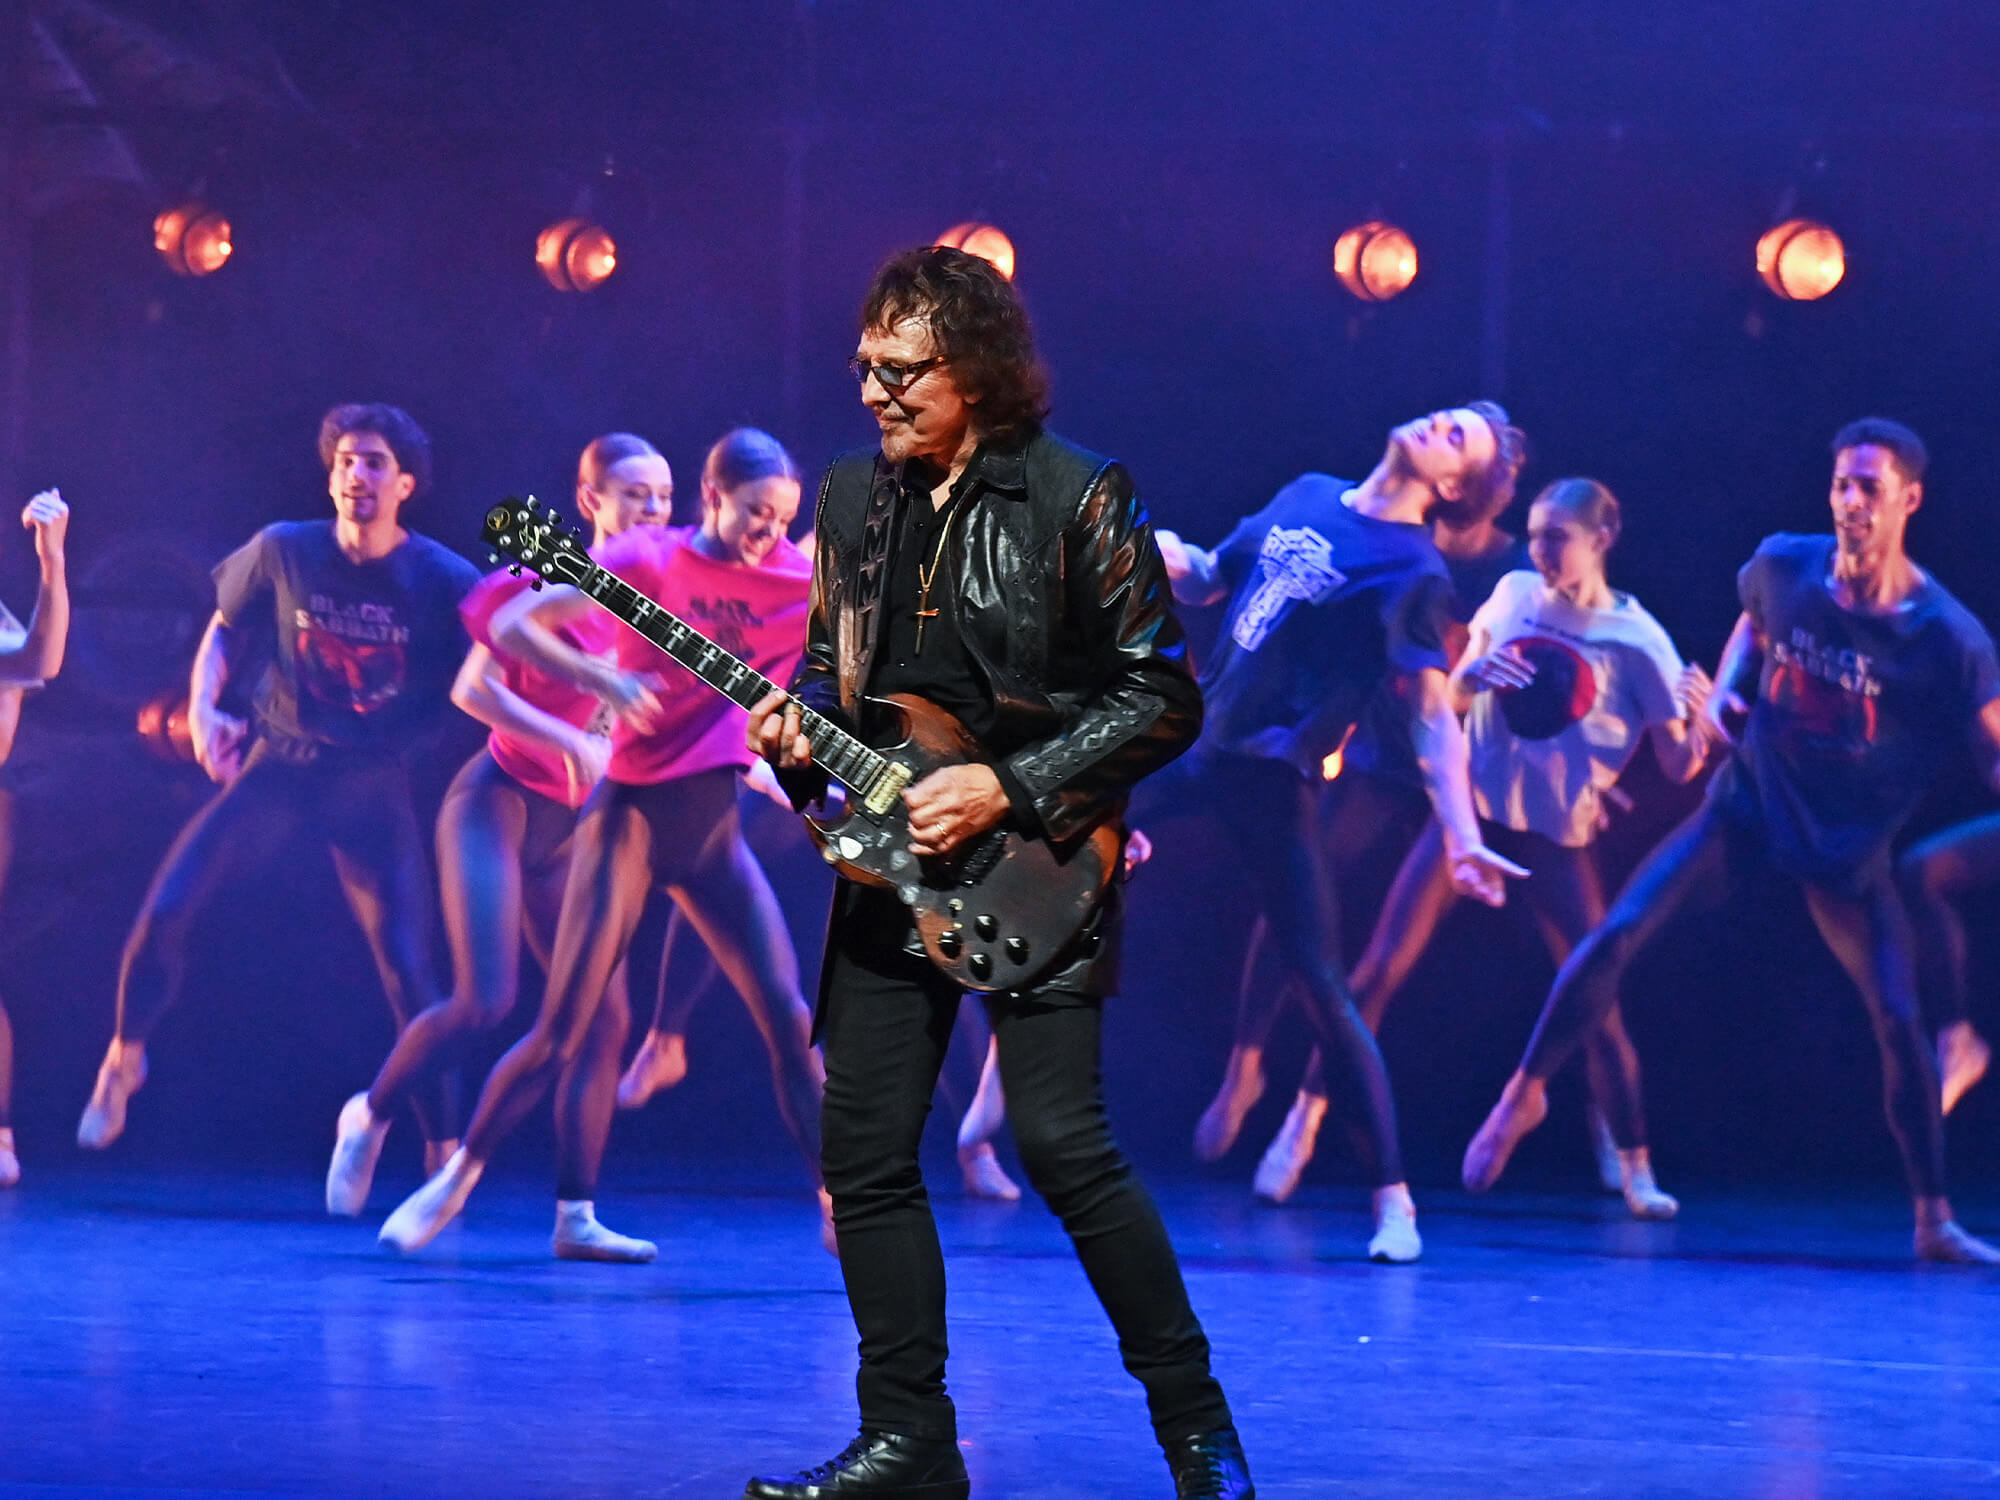 Tony Iommi playing guitar with the Black Sabbath Ballet dancers featured behind him.